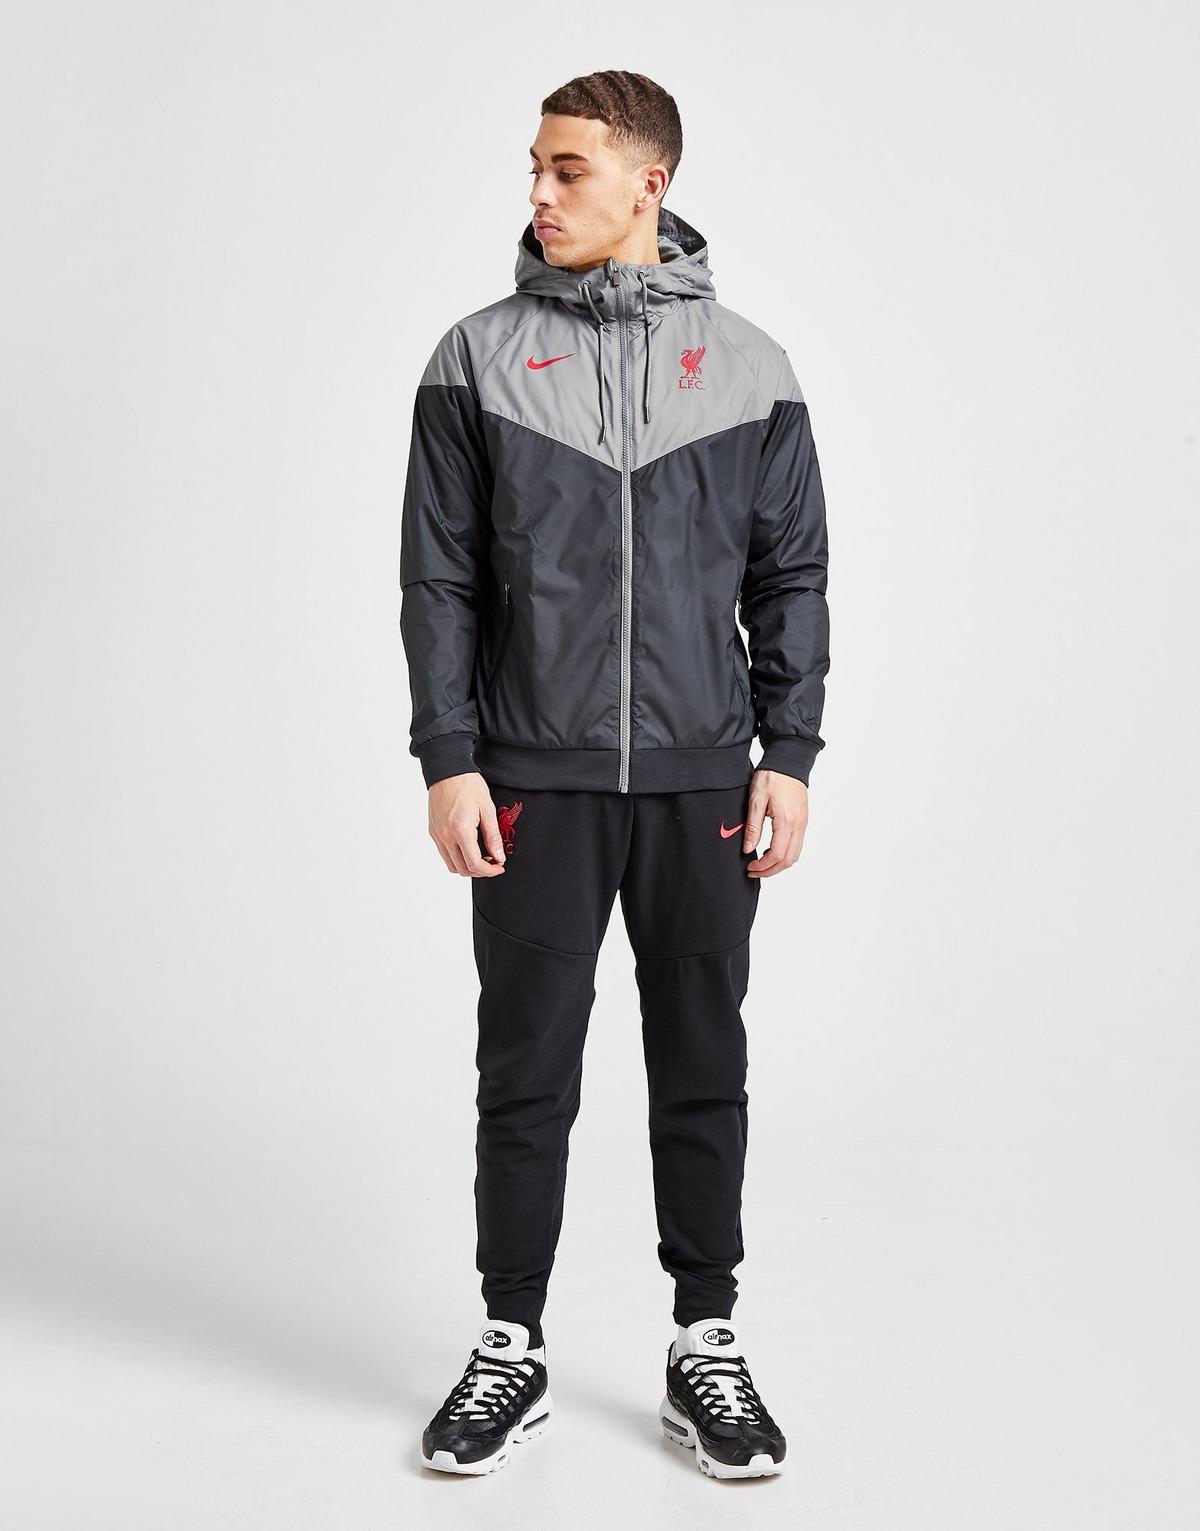 Nike Synthetic Liverpool Fc Windrunner Jacket in Gray for Men - Lyst